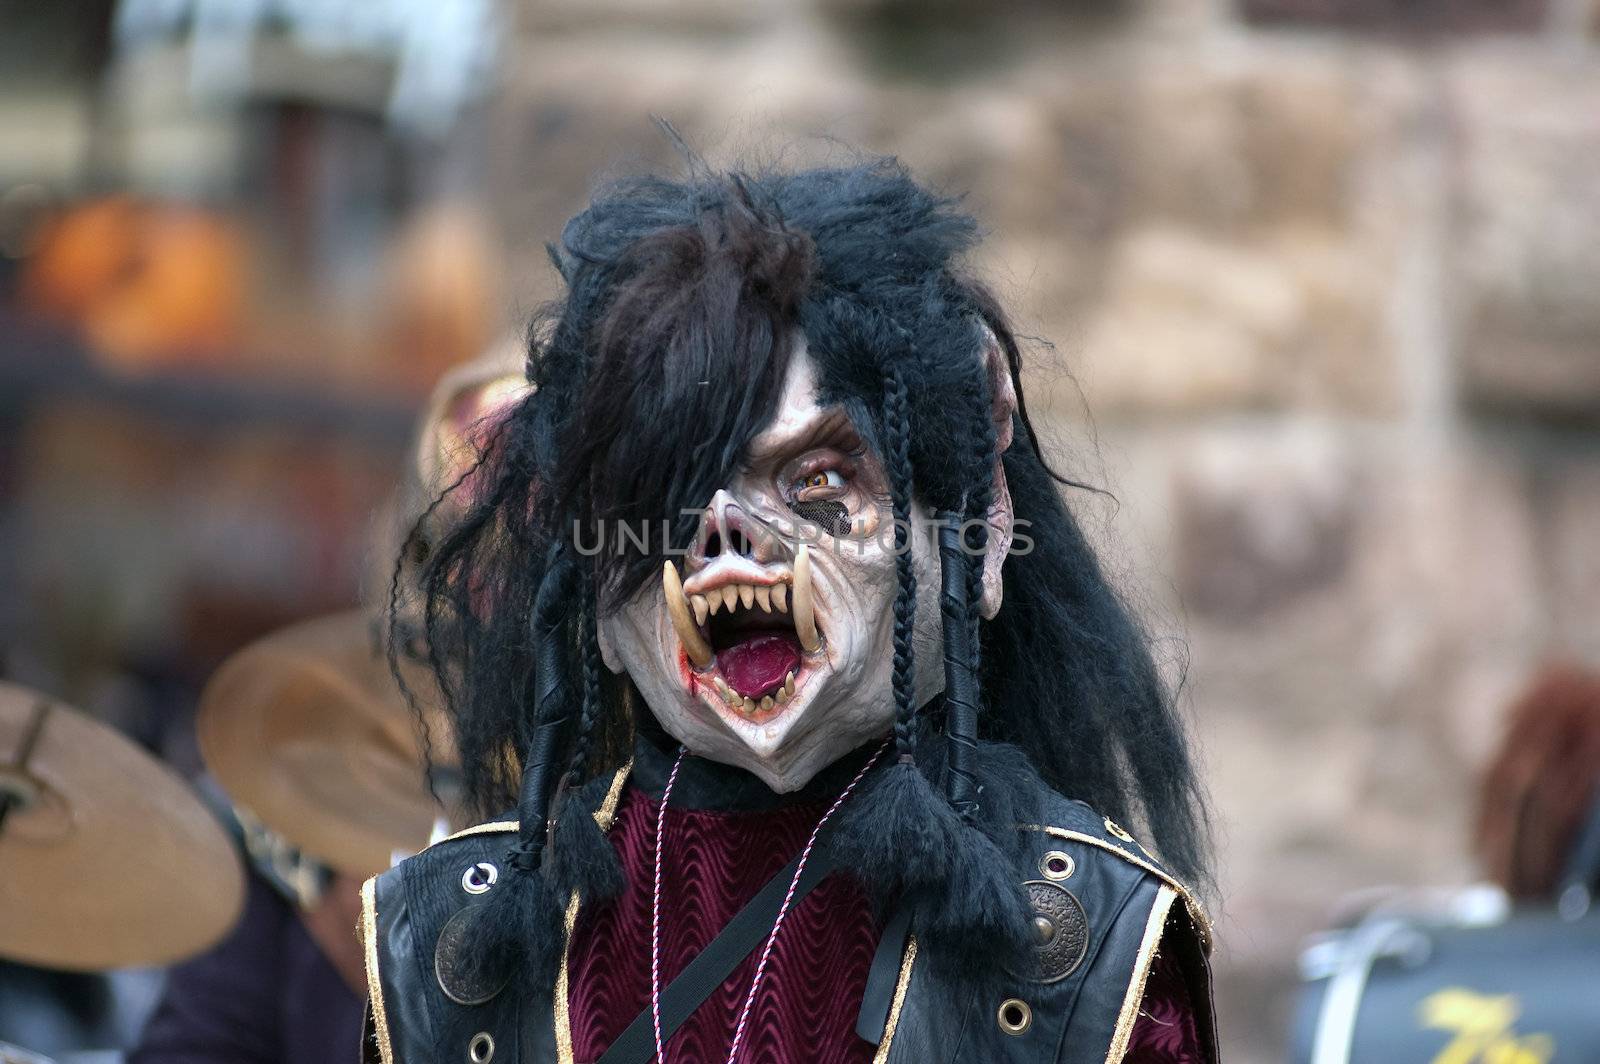 Mask parade at the historical carnival in Freiburg, Germany by Rainman